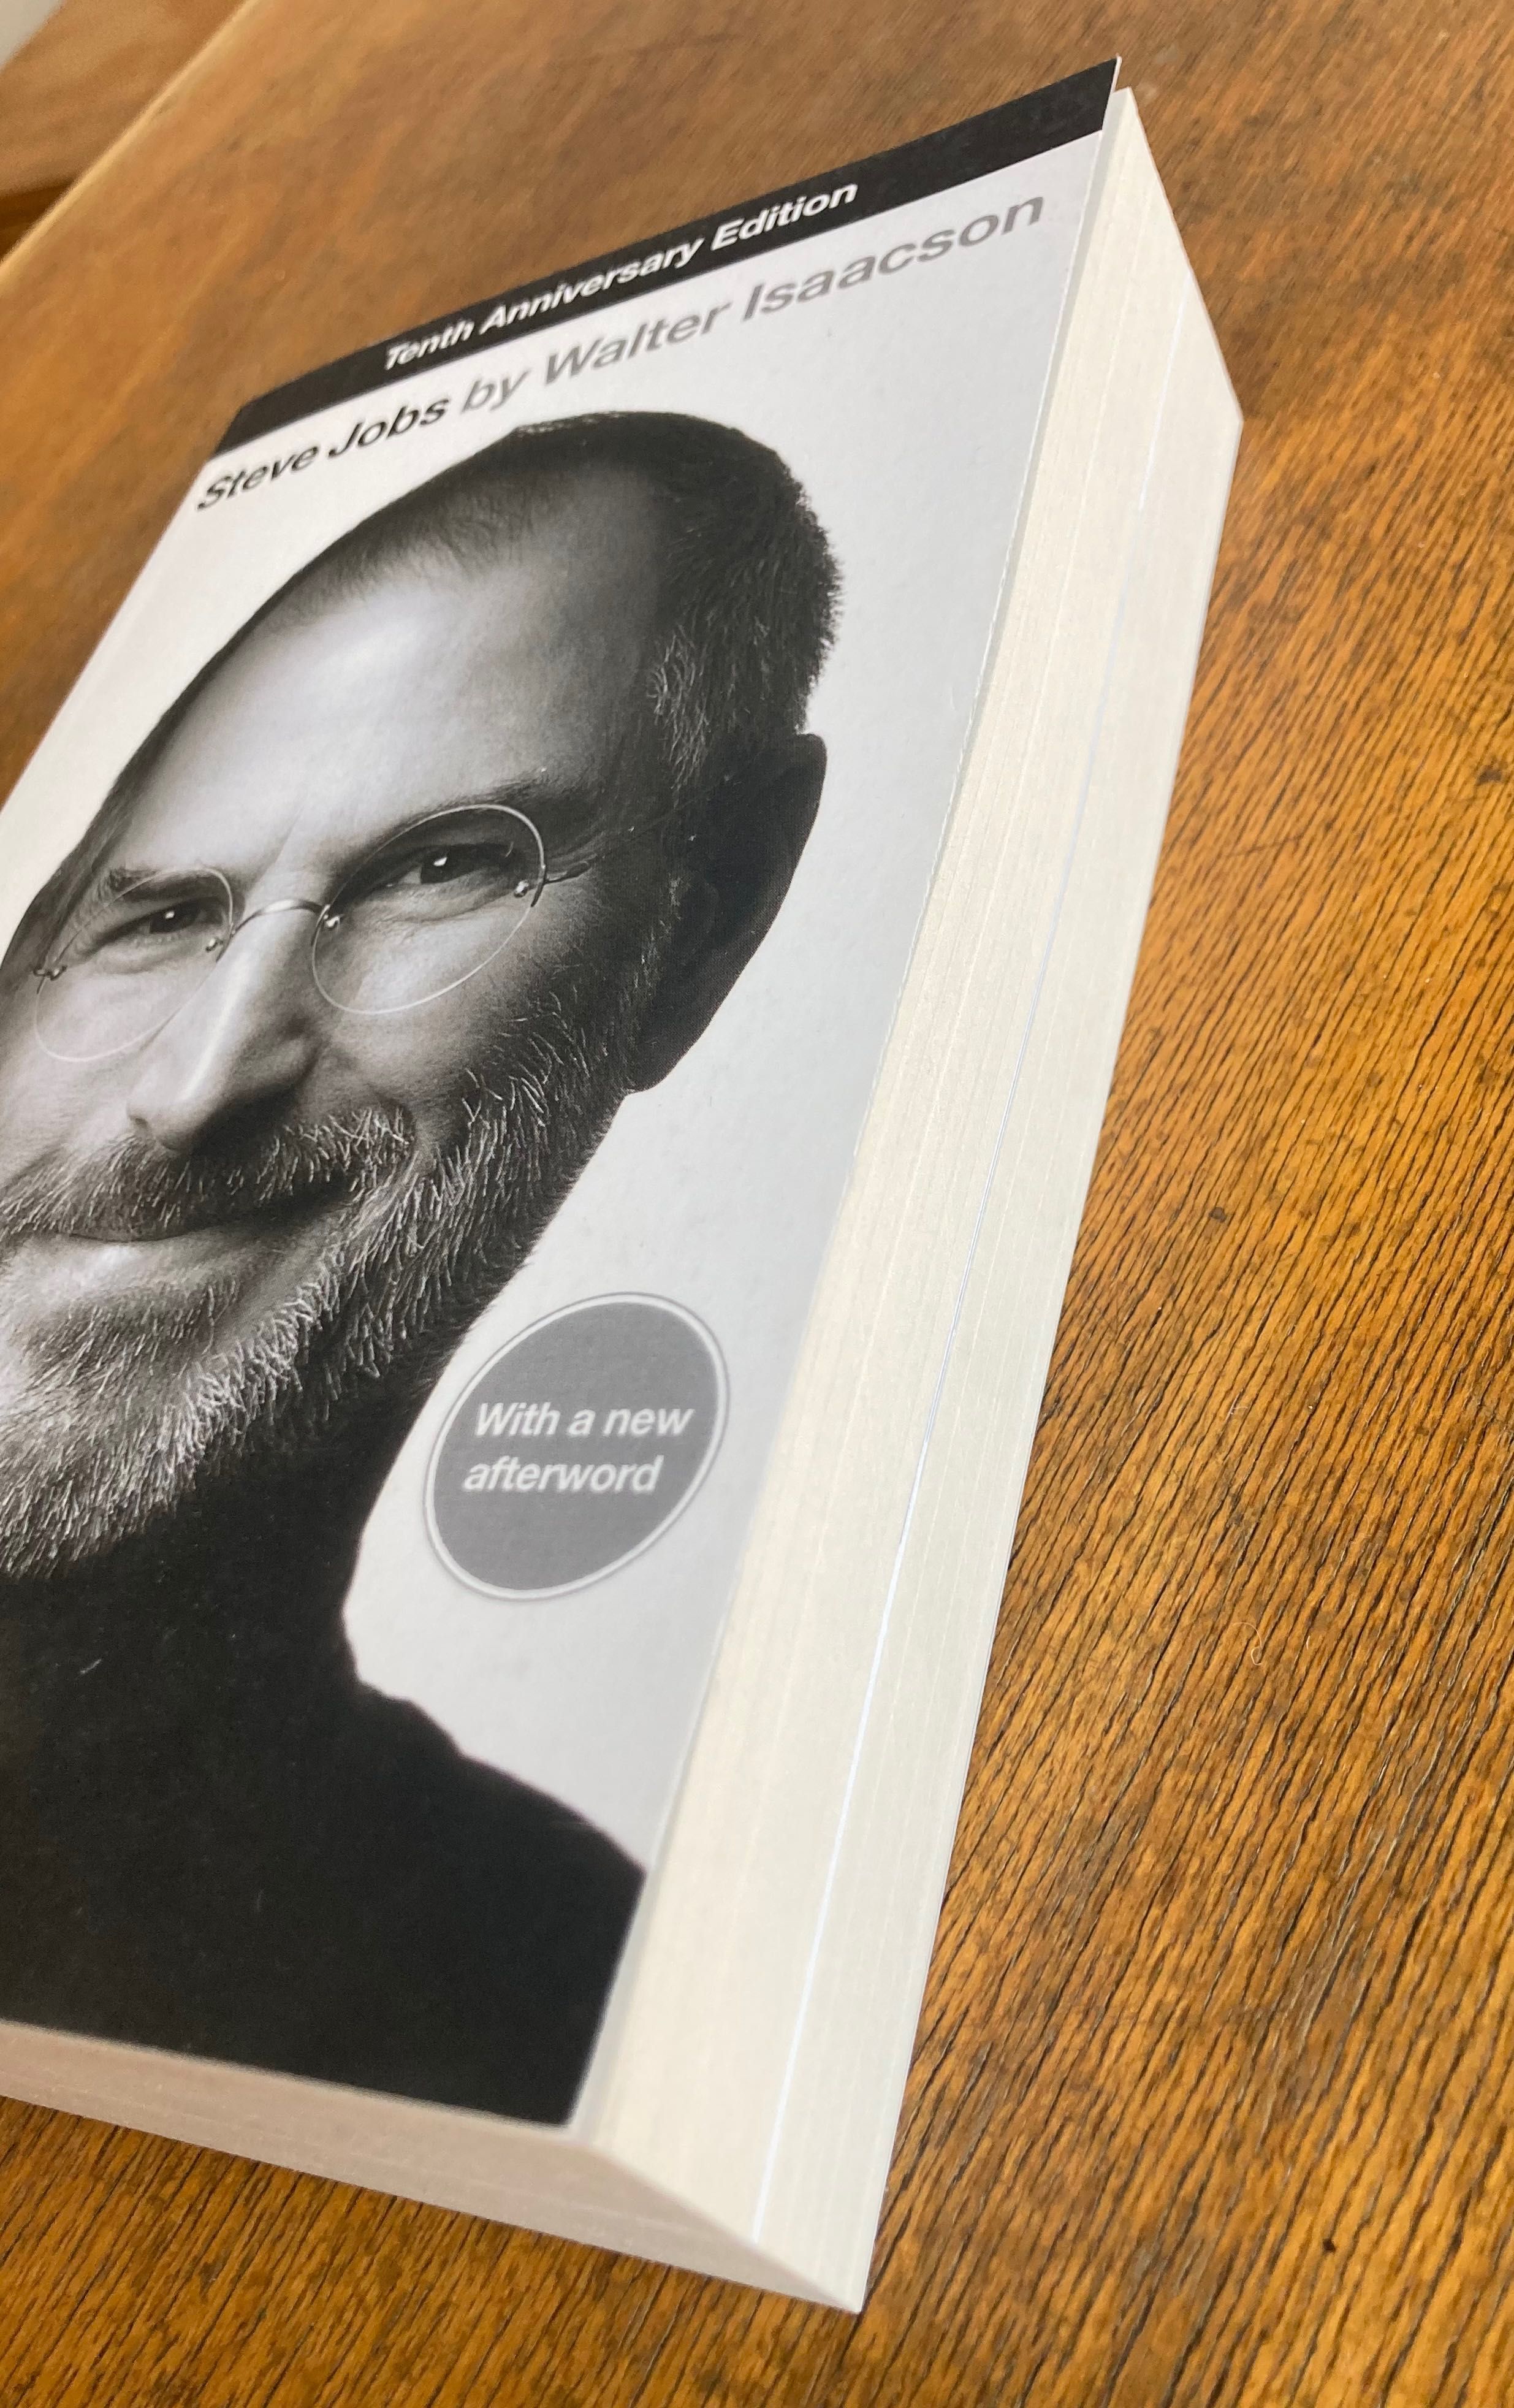 Steve Jobs by Walter Isaacson, new paperback, 10th anniversary edition